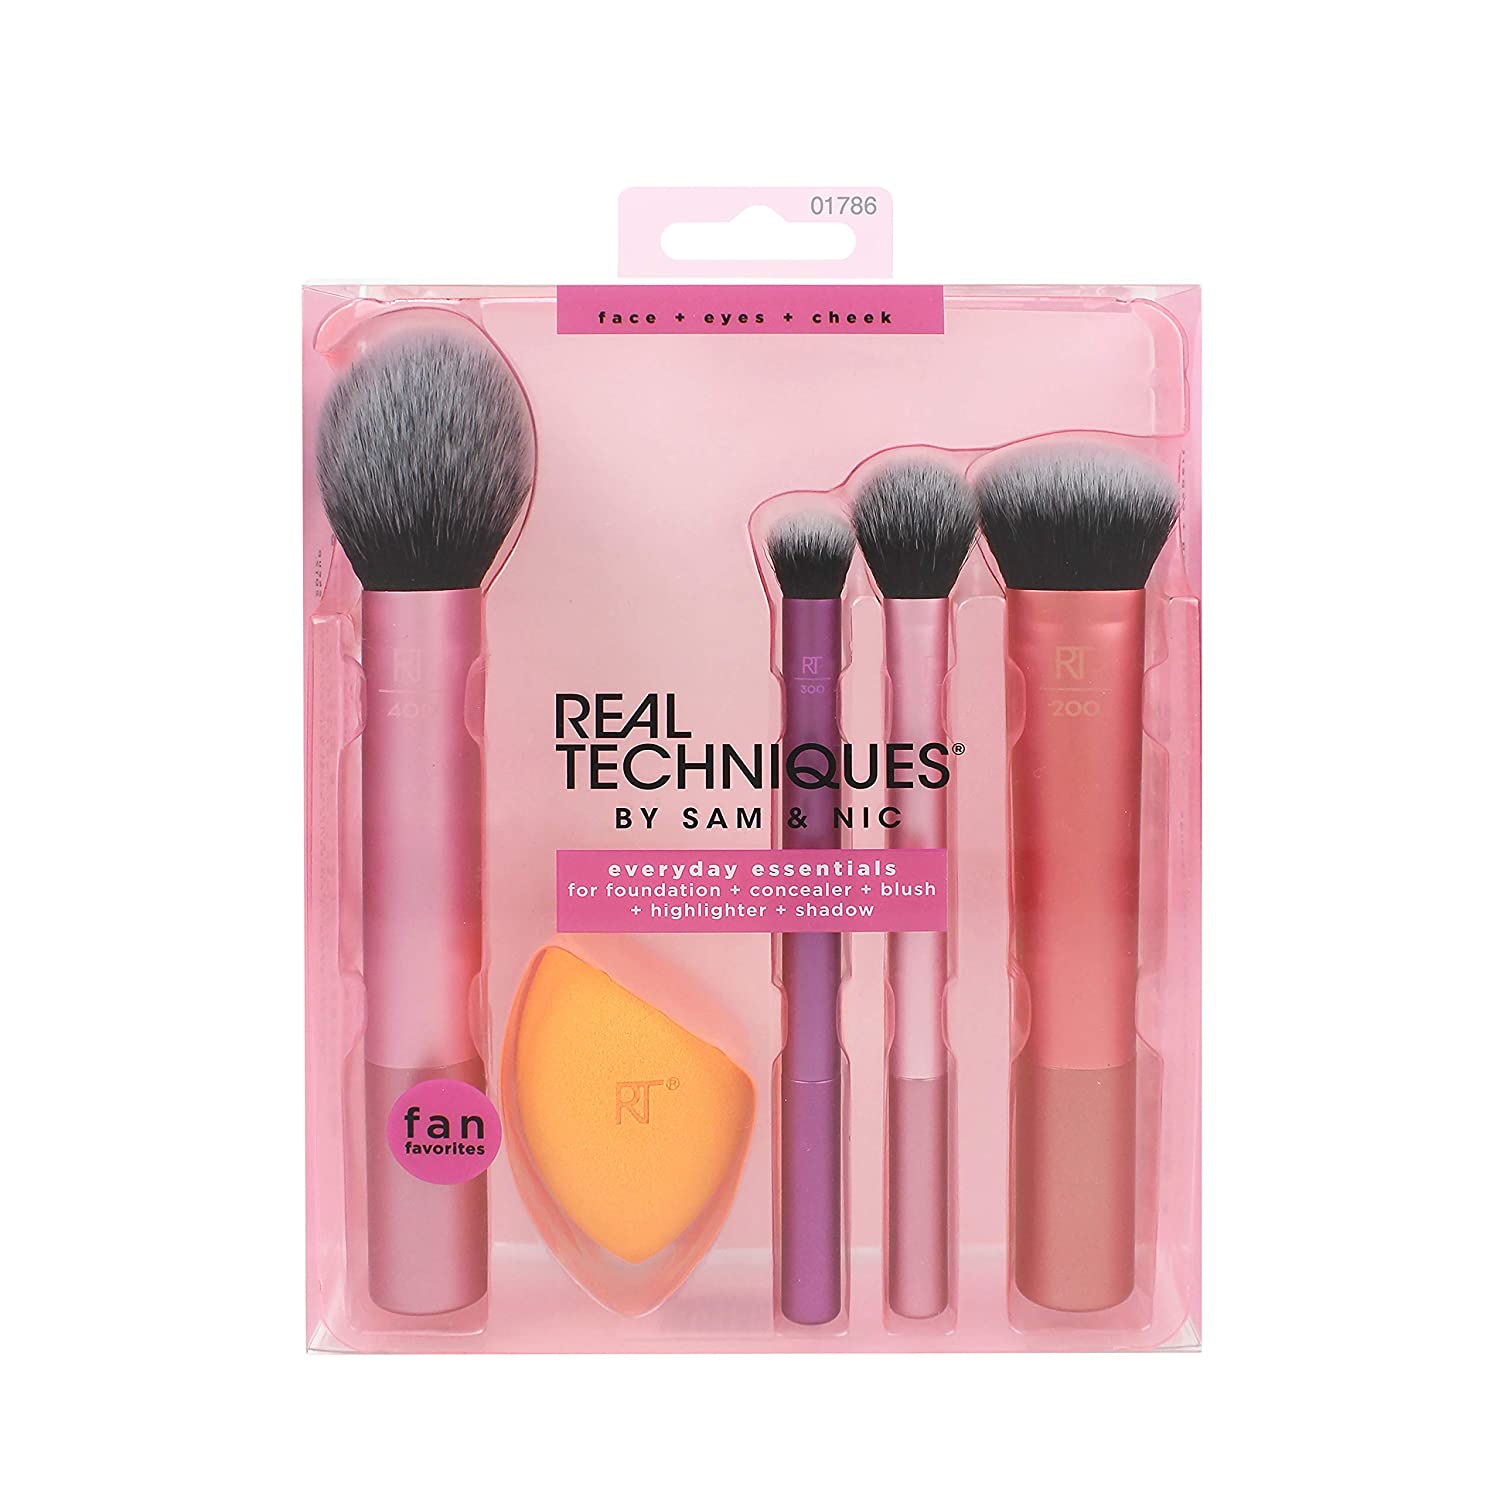 Prime Day Beauty Deals Worth Knowing About,